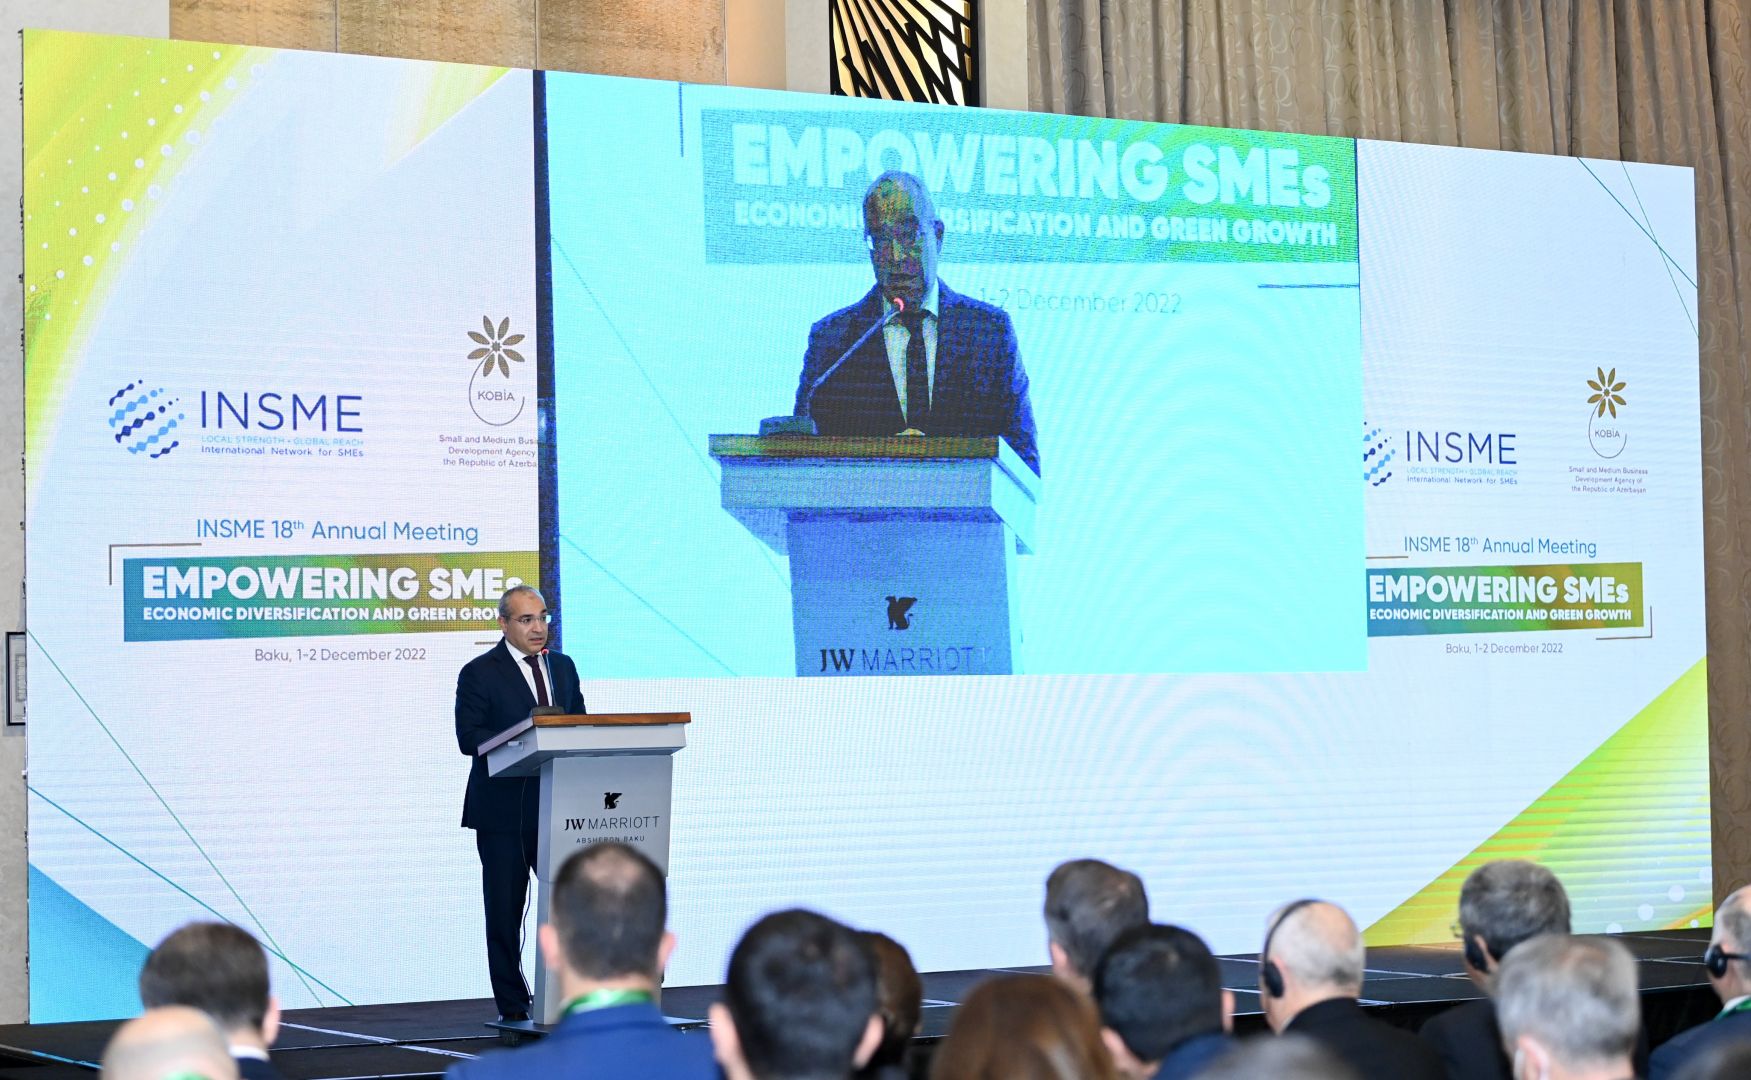 Baku hosts int'l event on empowering SMEs, economic diversification & green growth [PHOTO]